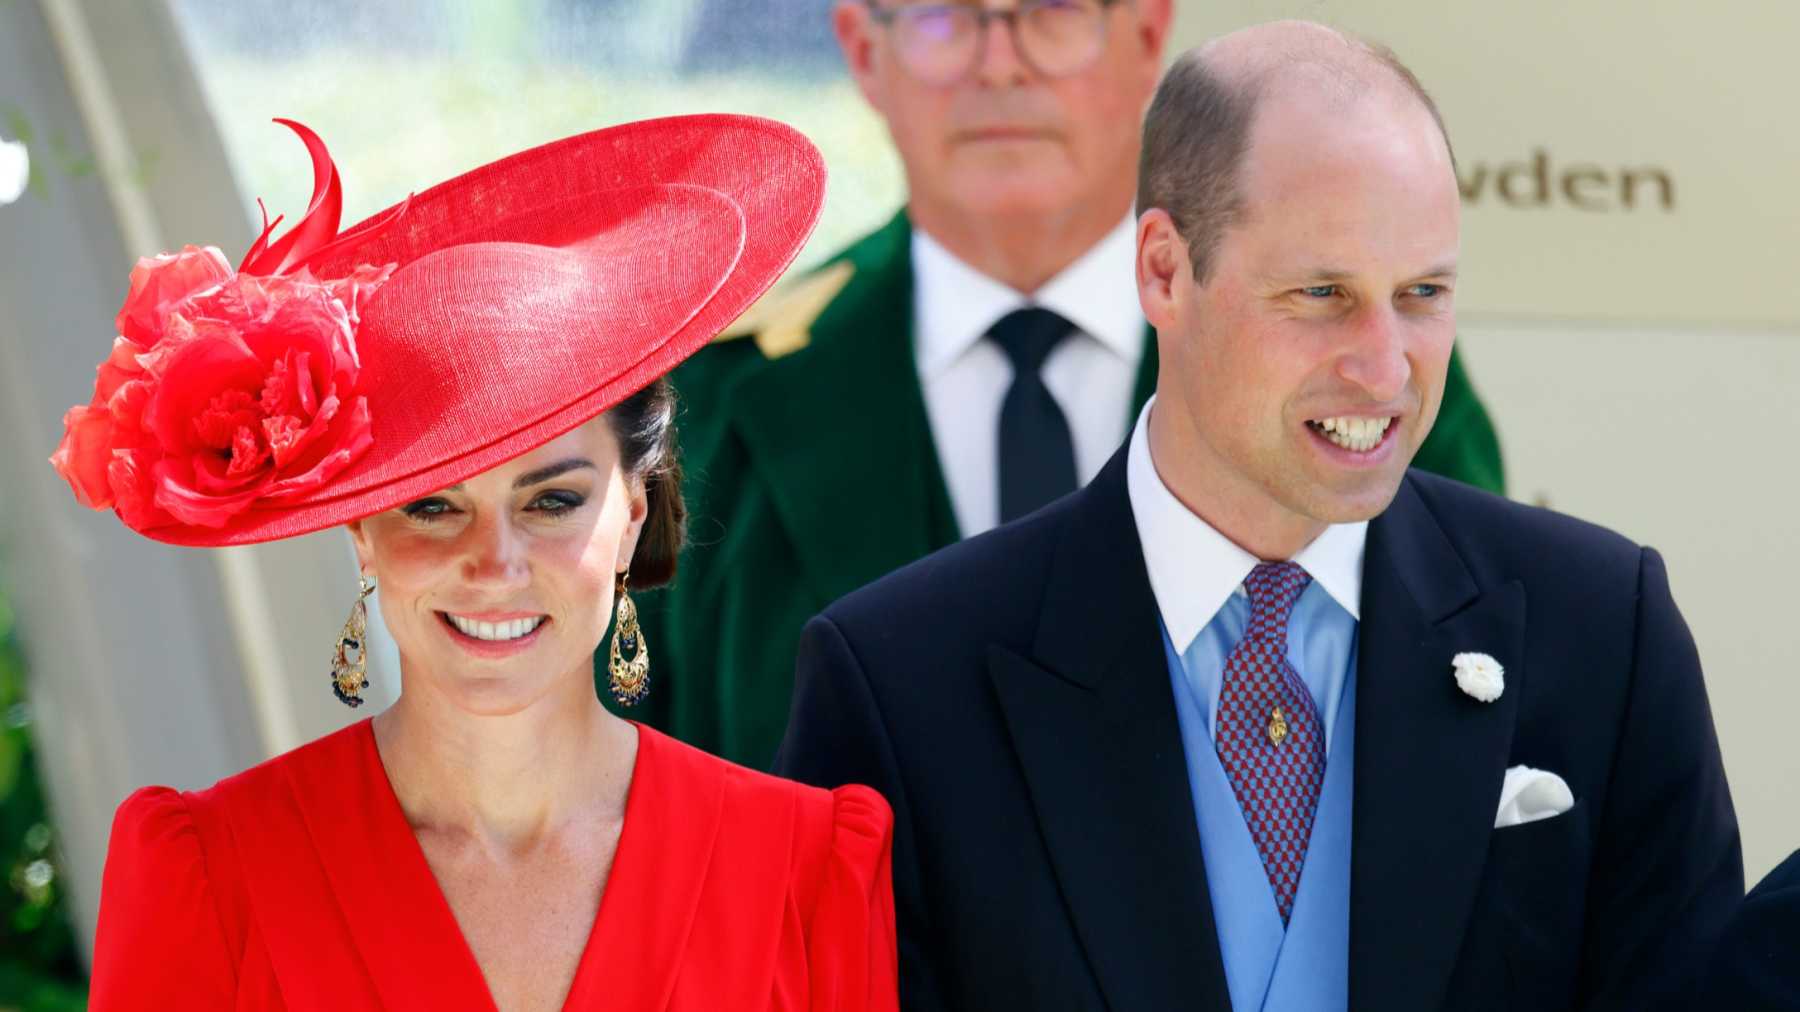 Kate Middleton Wears Bold Red Dress & Gets Handsy With Prince William ...